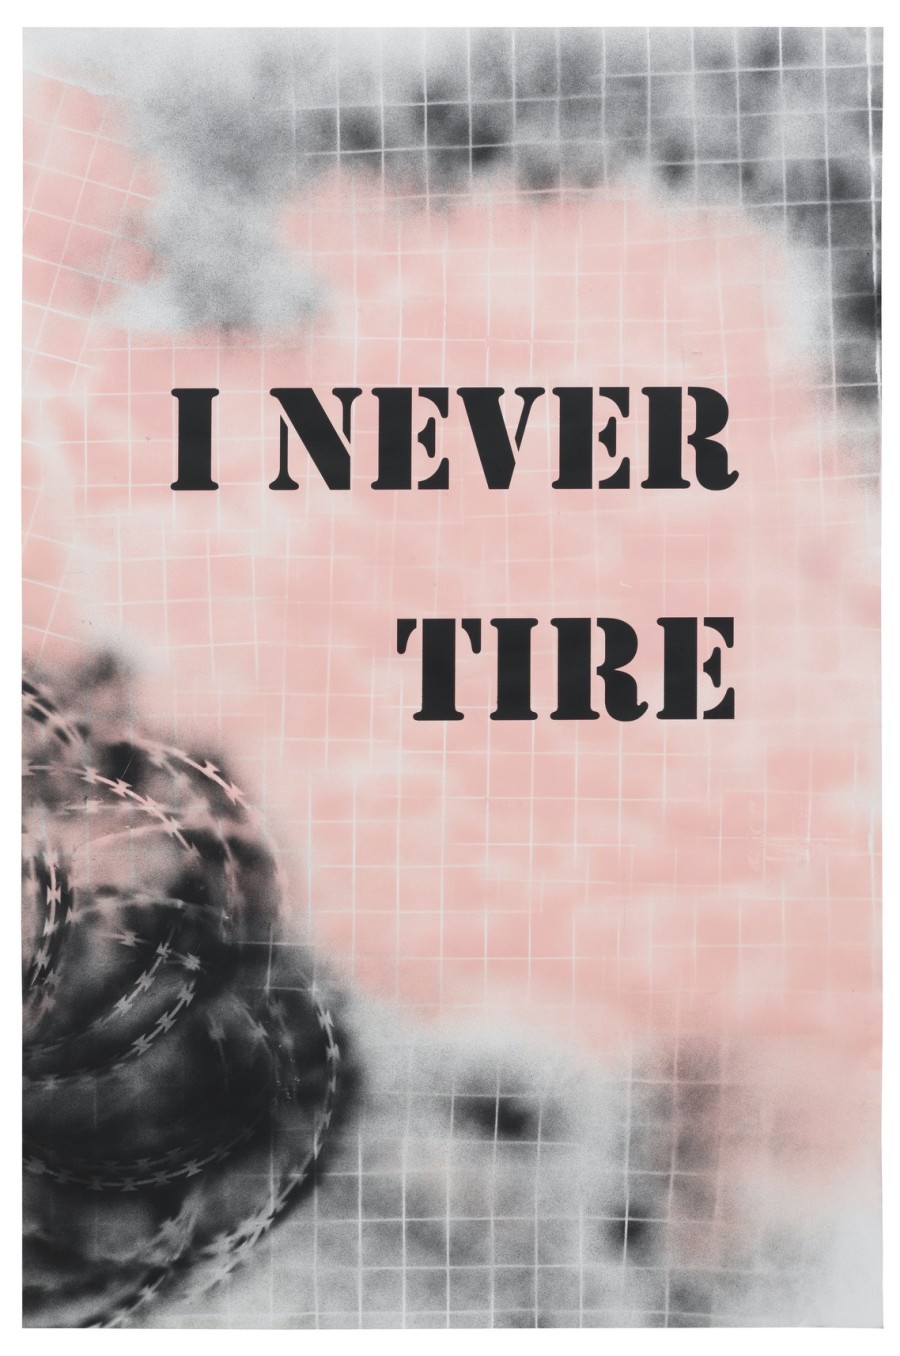 Never Tire / Black, 2021 Tempera and spray paint on Fabriano paper, mounted on aluminum 153 x 103 cm (60 1/4 x 40 1/2 in.)  Courtesy of the artist and Galerie Peter Kilchmann, Zurich Copyright: Jens Ziehe